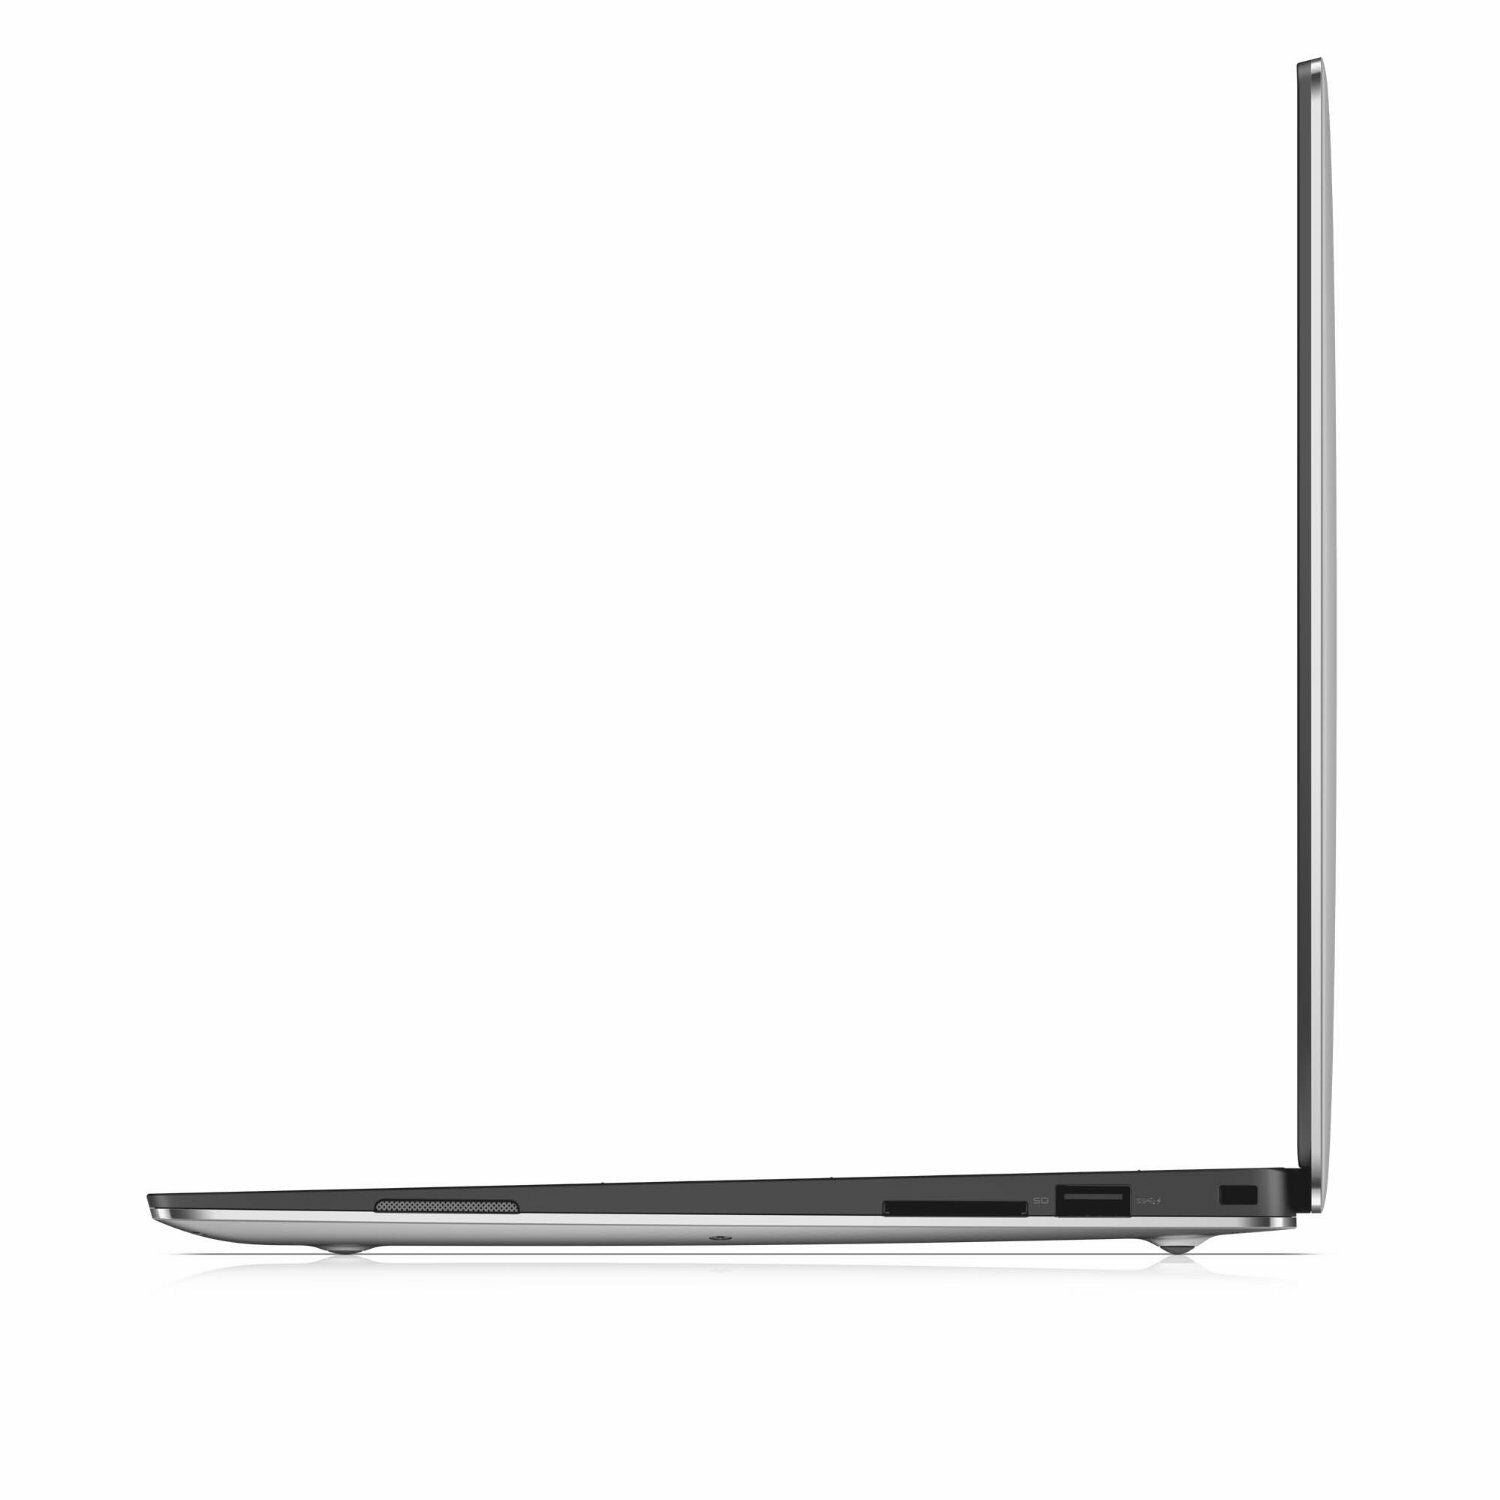 Dell XPS 13" Touch Screen Laptop Core i5-5200U 2.3GHz 8GB RAM 238GB SSD, Silver